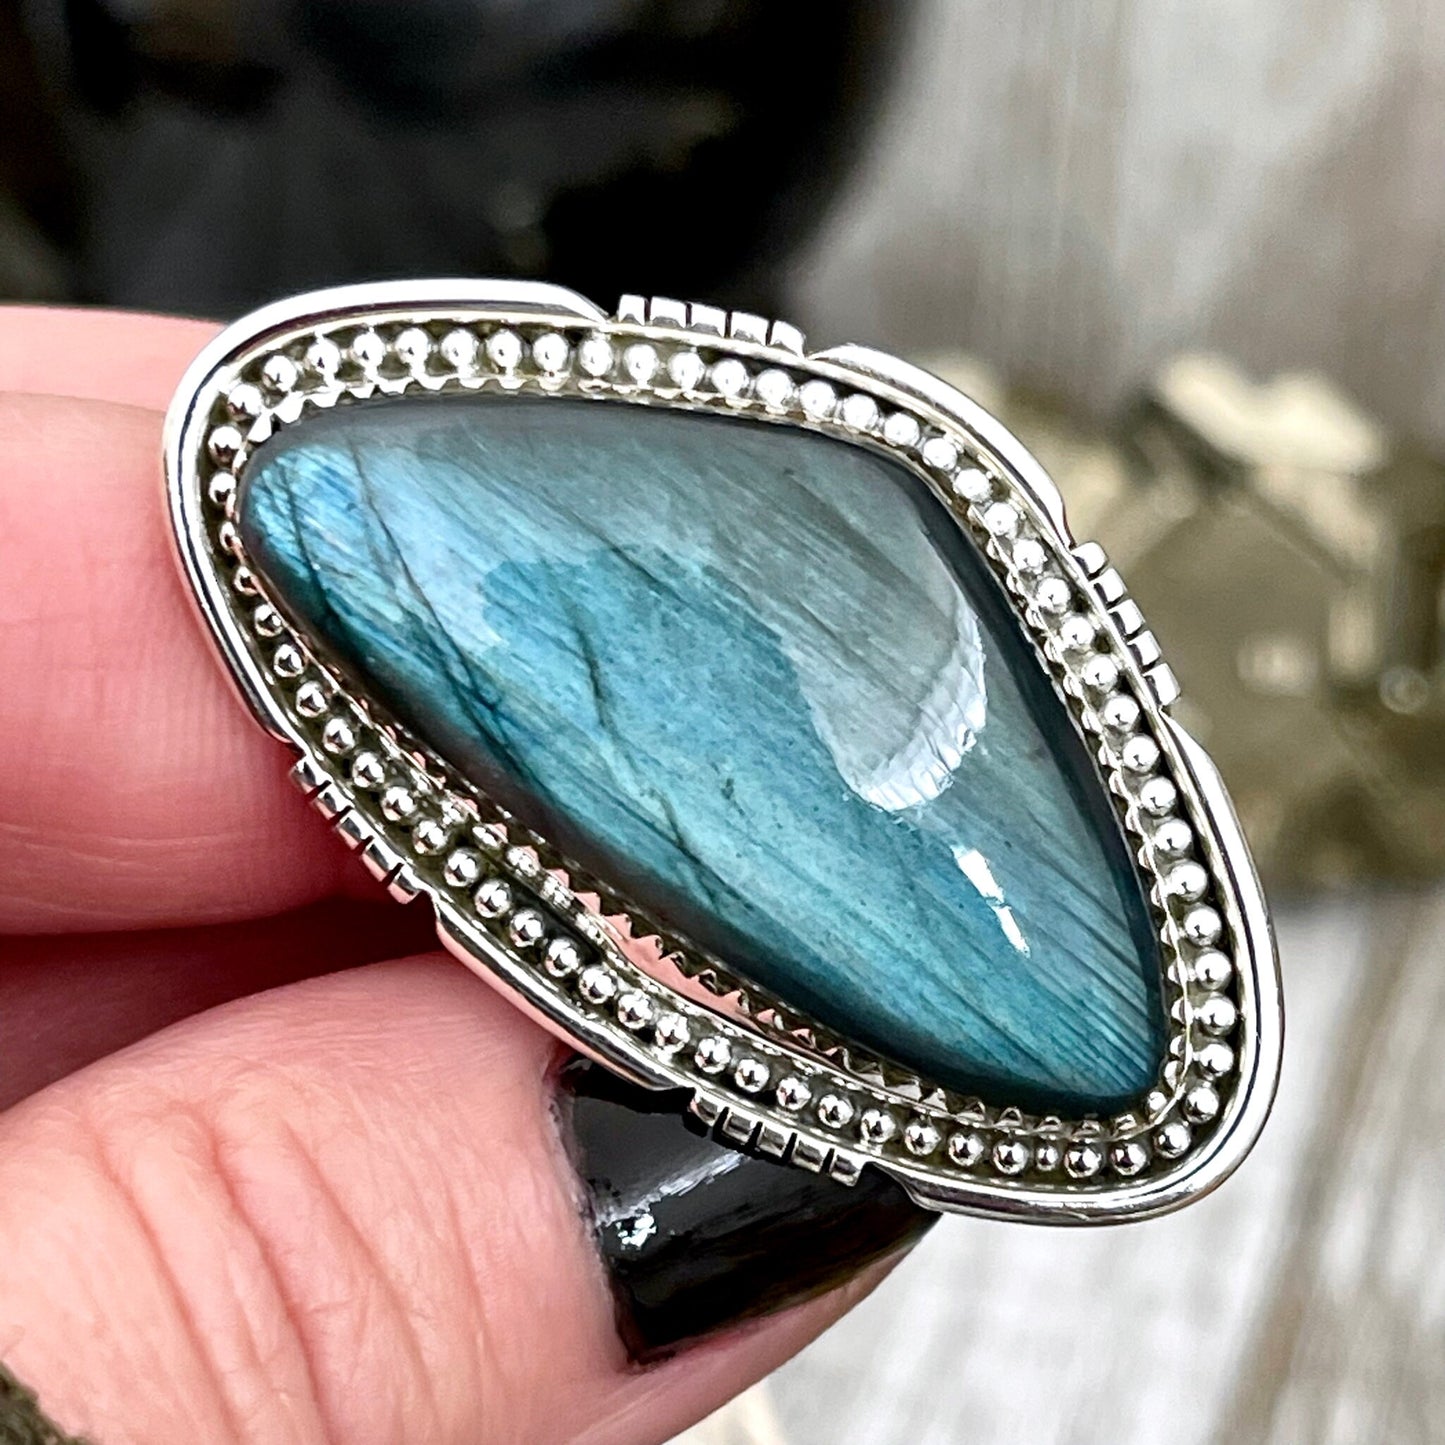 Big Labradorite Crystal Statement Ring in Sterling Silver - Designed by FOXLARK Collection Adjusts to size 6,7,8,9, or 10 | Blue Stone